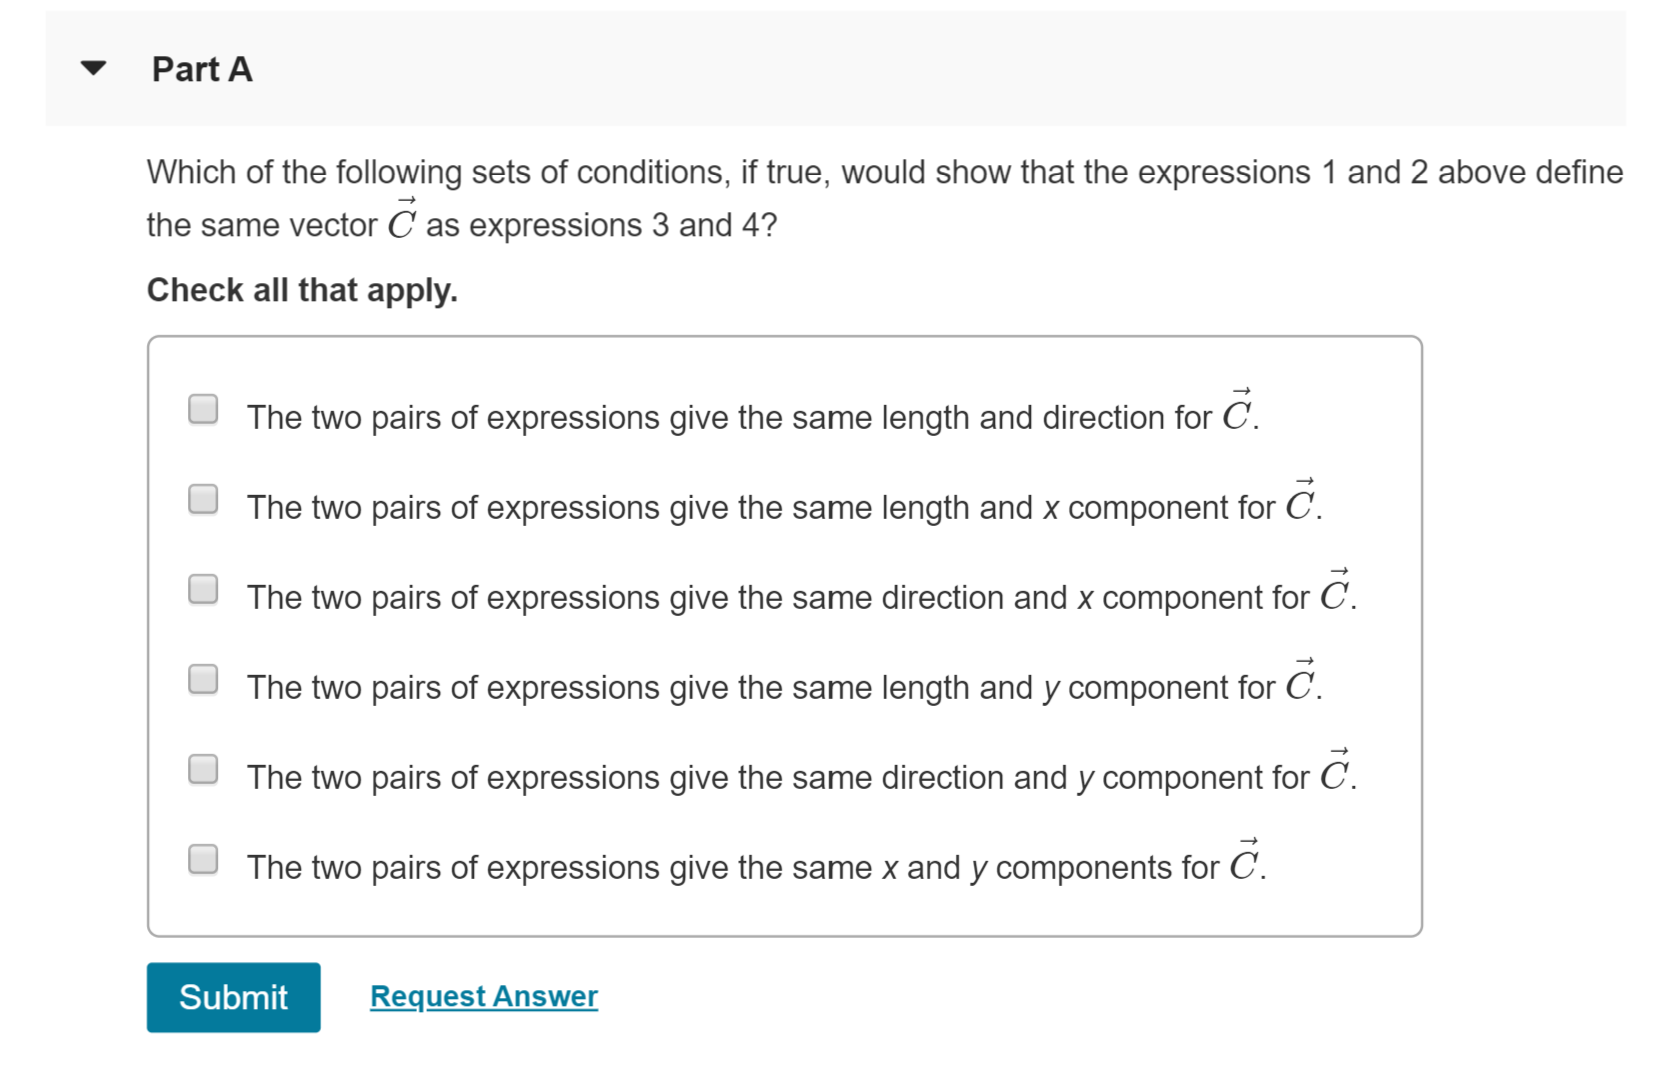 Part A
Which of the following sets of conditions, if true, would show that the expressions 1 and 2 above define
the same vector C as expressions 3 and 4?
Check all that apply
The two pairs of expressions give the same length and direction for C.
C.
The two pairs of expressions give the same length and x component for
The two pairs of expressions give the same direction and x component for C.
The two pairs of expressions give the same length and y component for C
The two pairs of expressions give the same direction and y component for C.
The two pairs of expressions give the same x and y components for C
Submit
Request Answer
